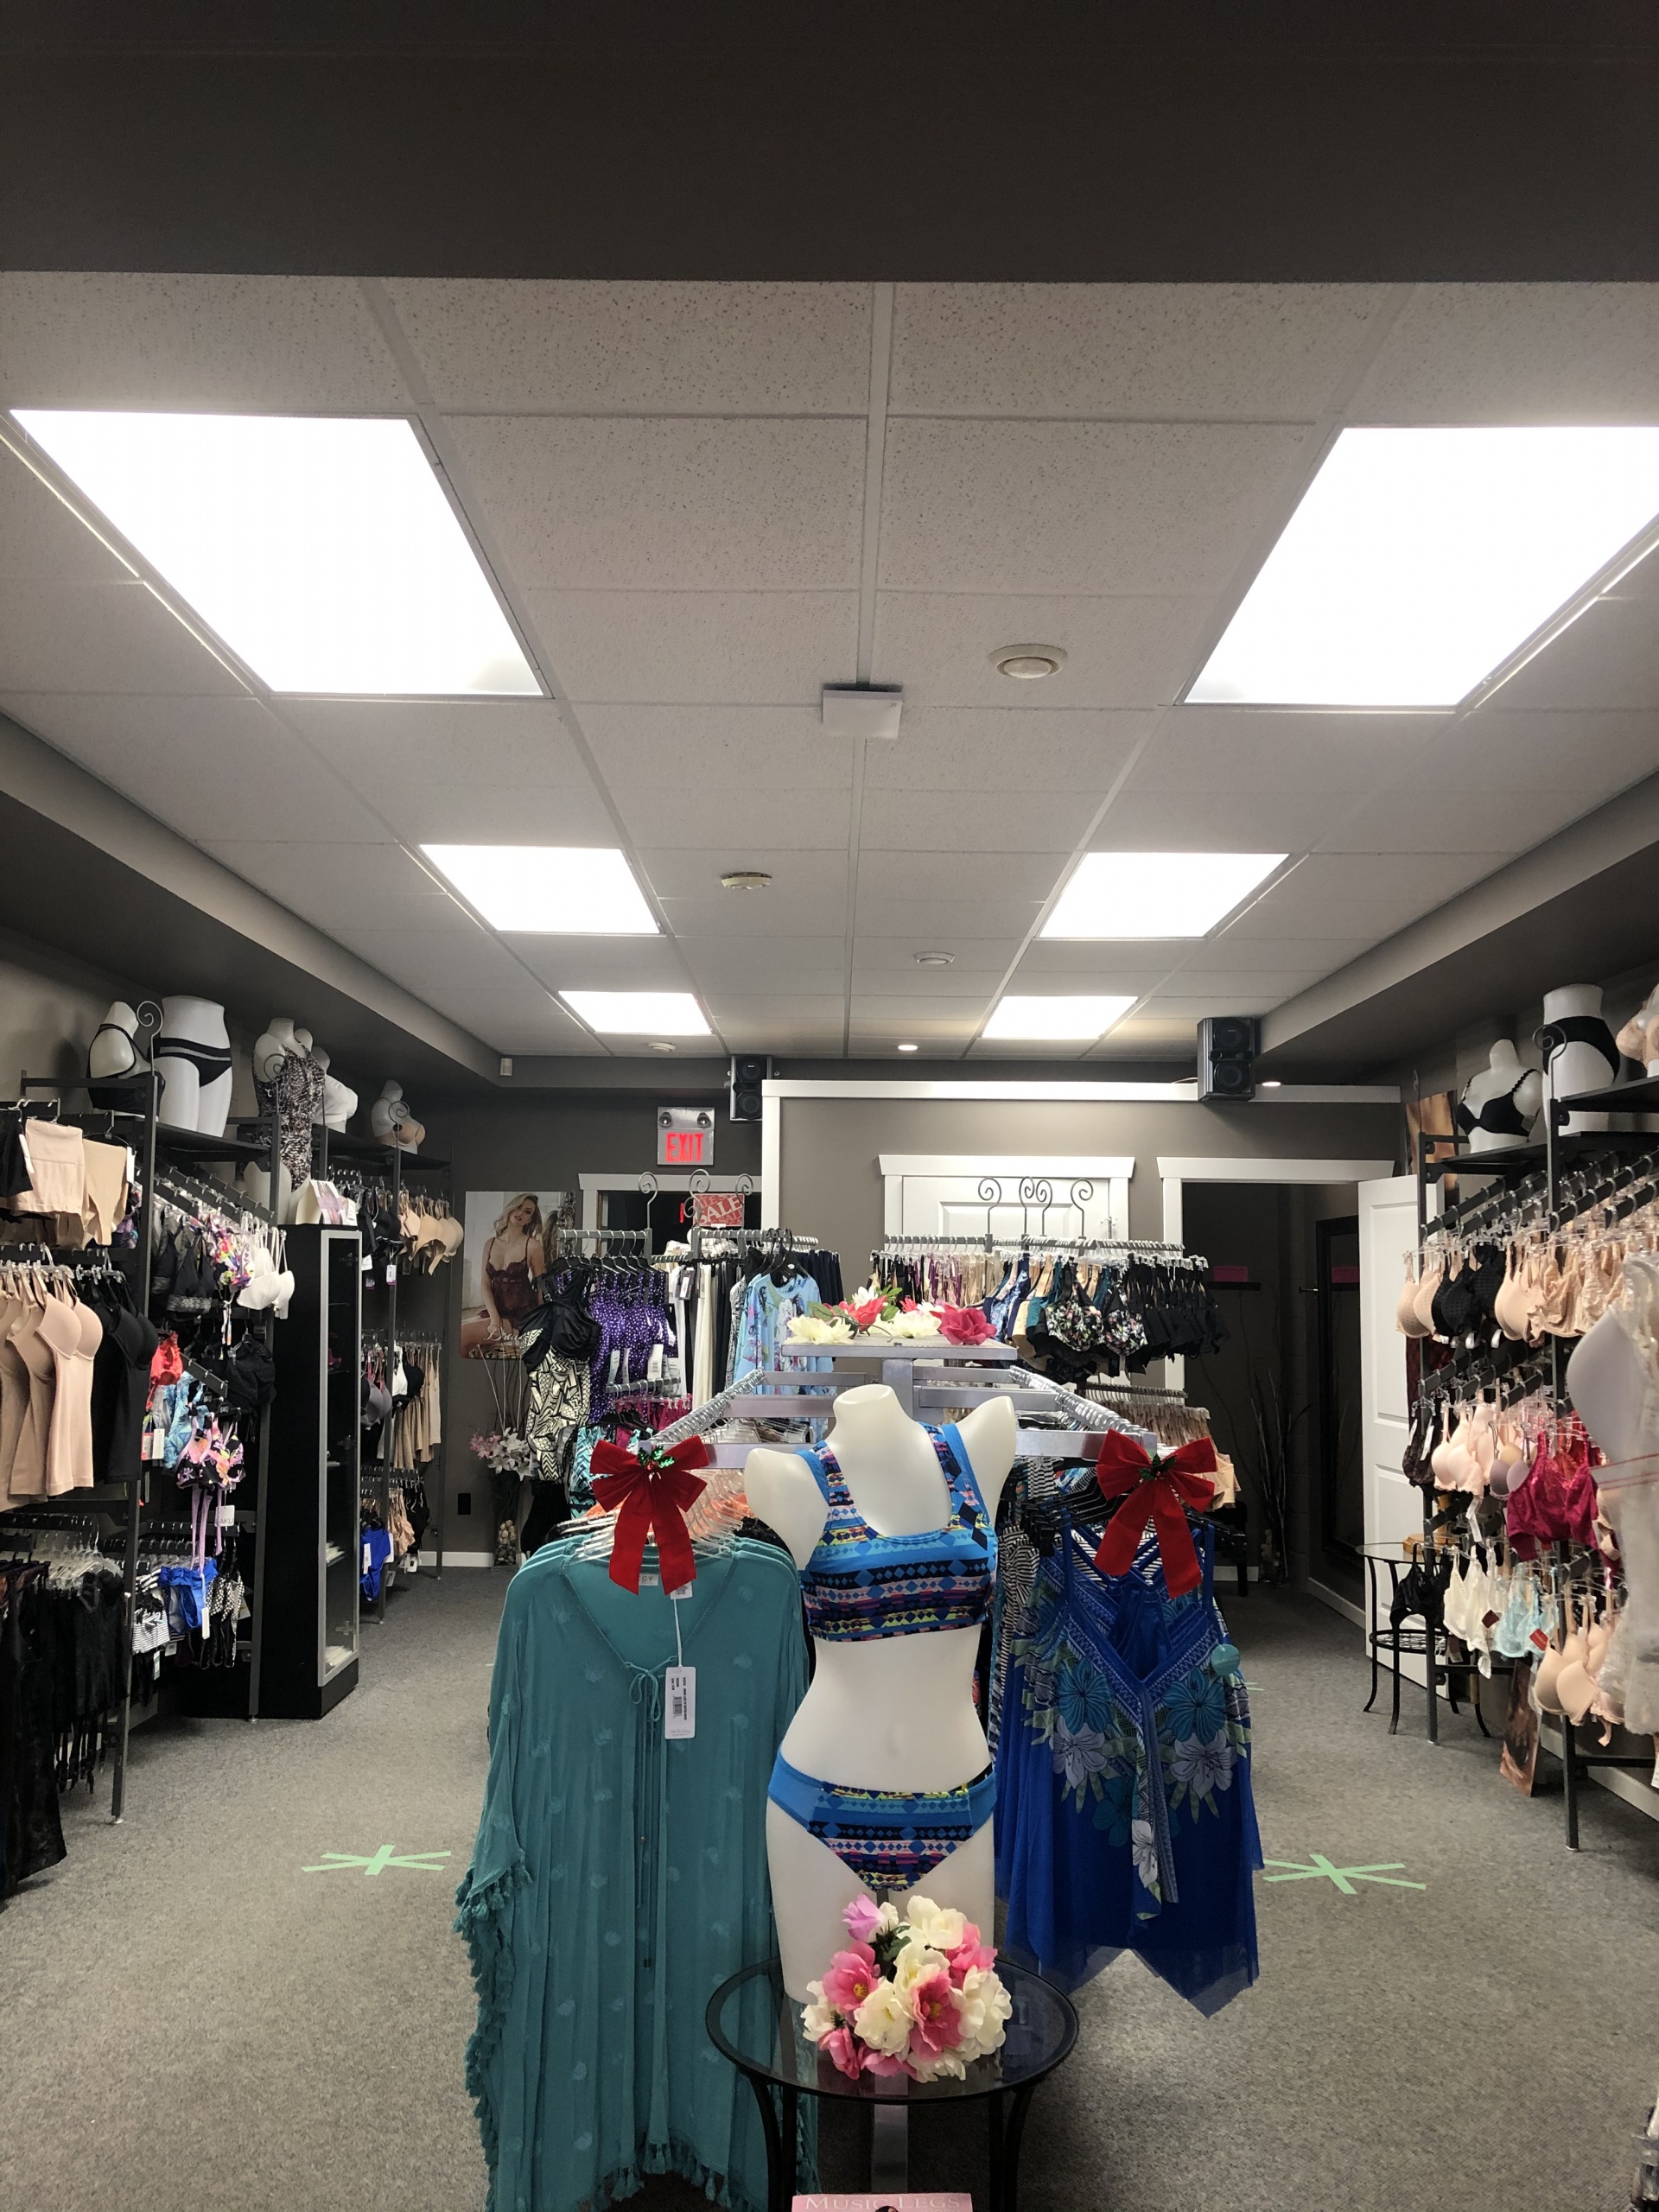 Chantilly Lingerie and Swim Boutique - Chantilly Lingerie